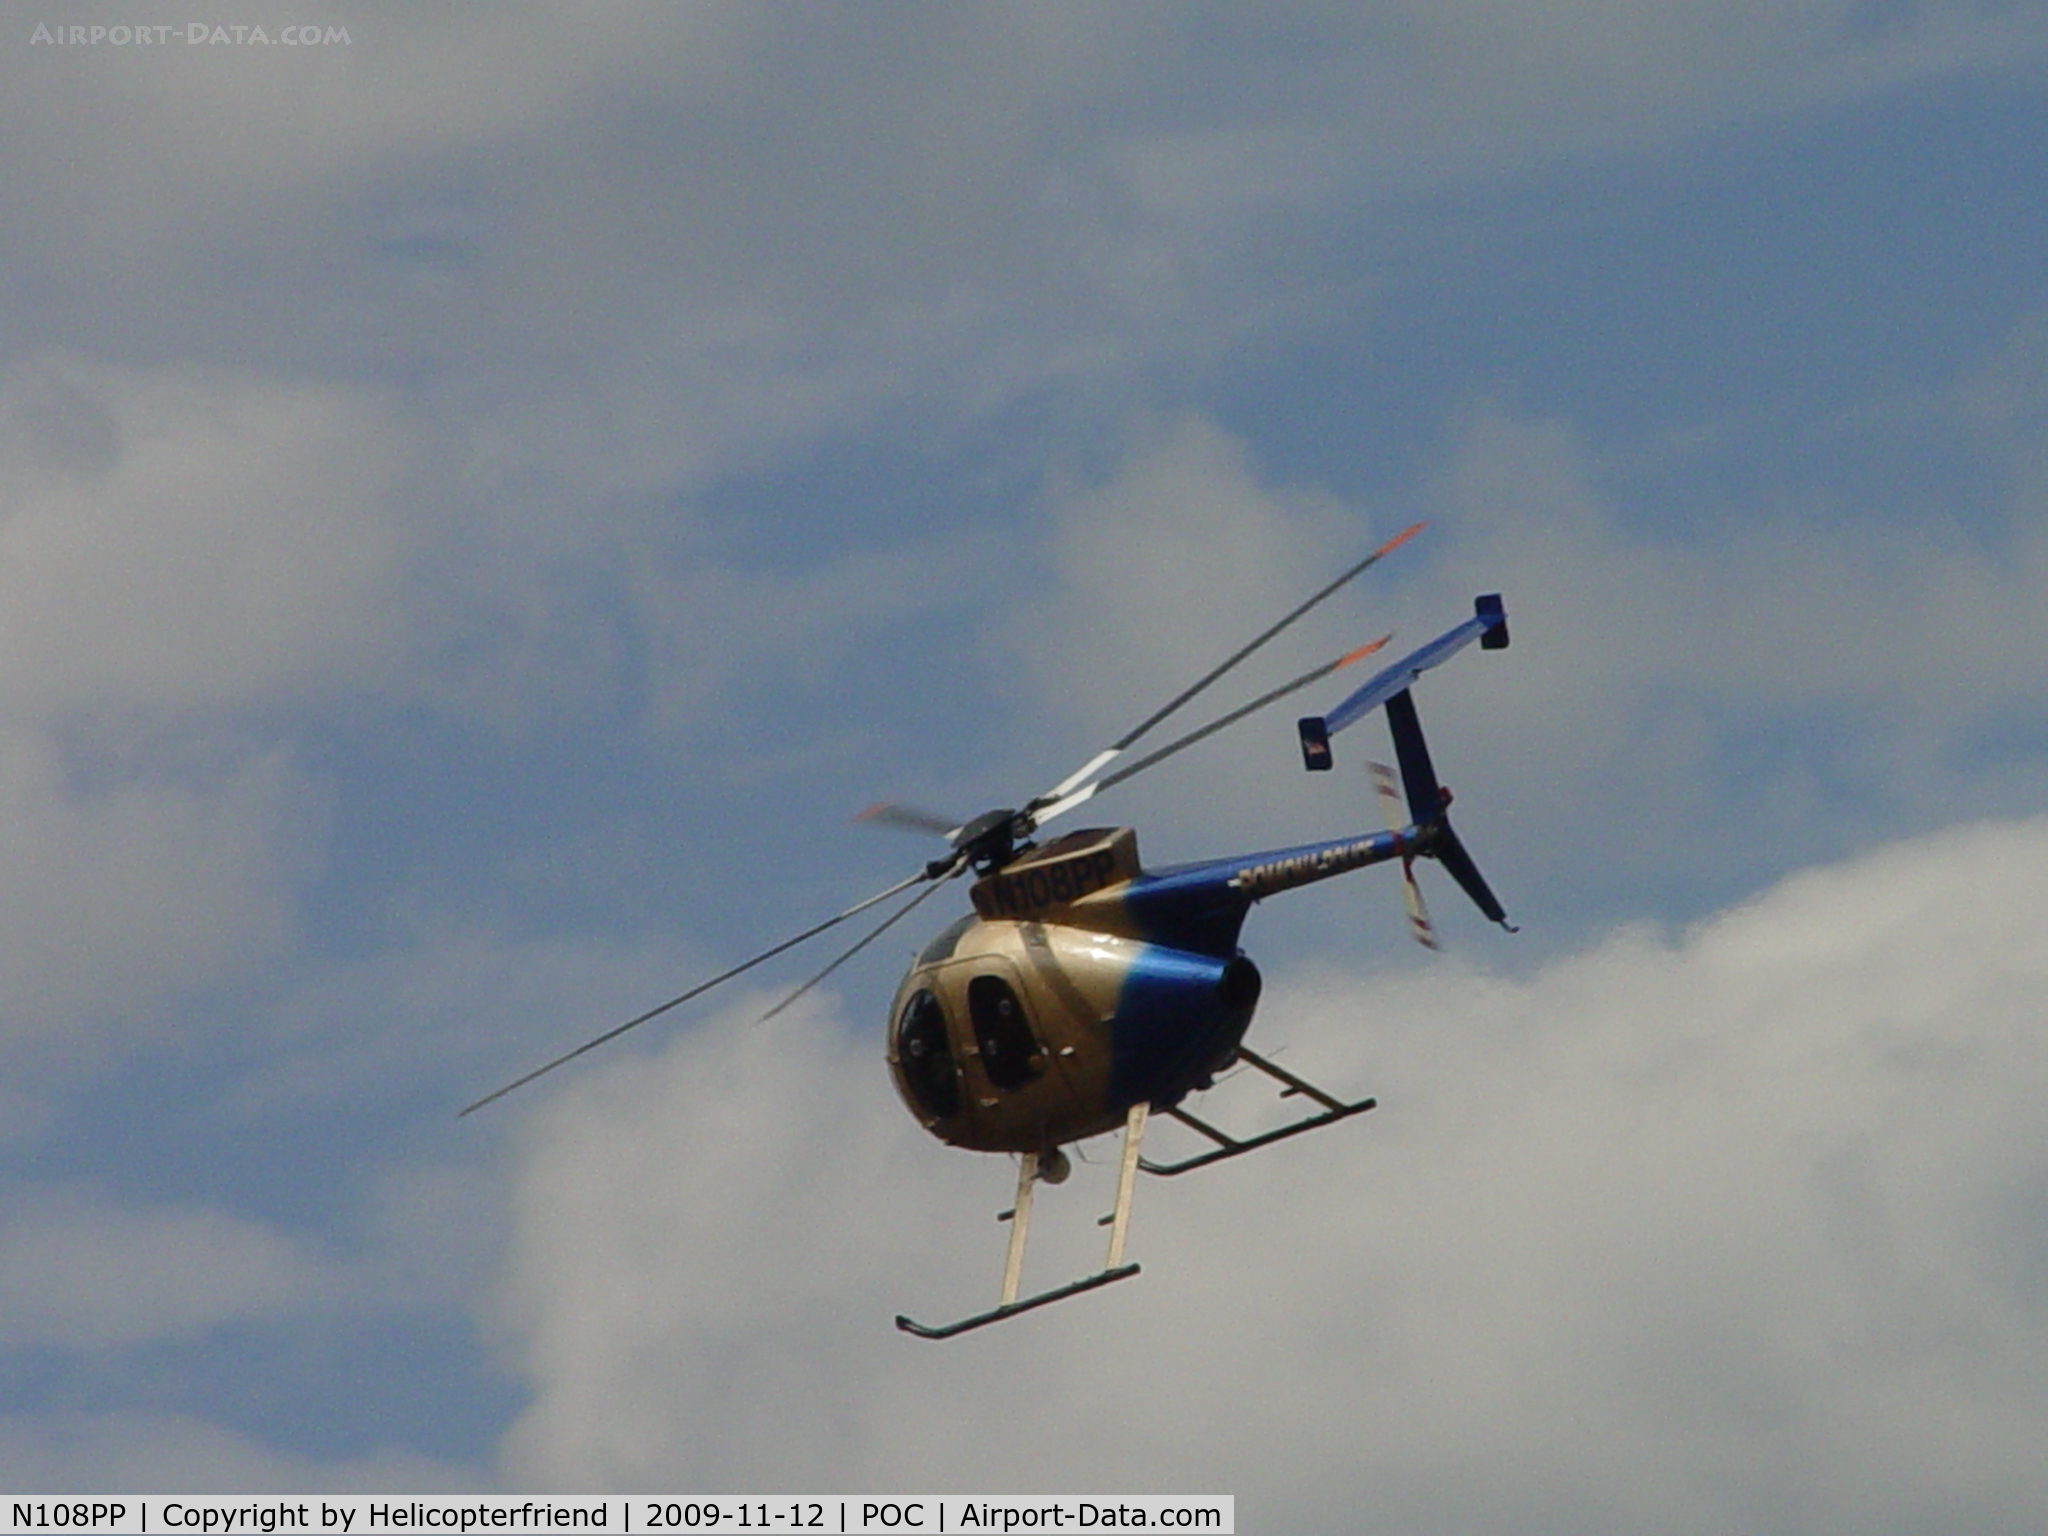 N108PP, 2008 MD Helicopters 369E C/N 0578E, Climbing and turning southbound